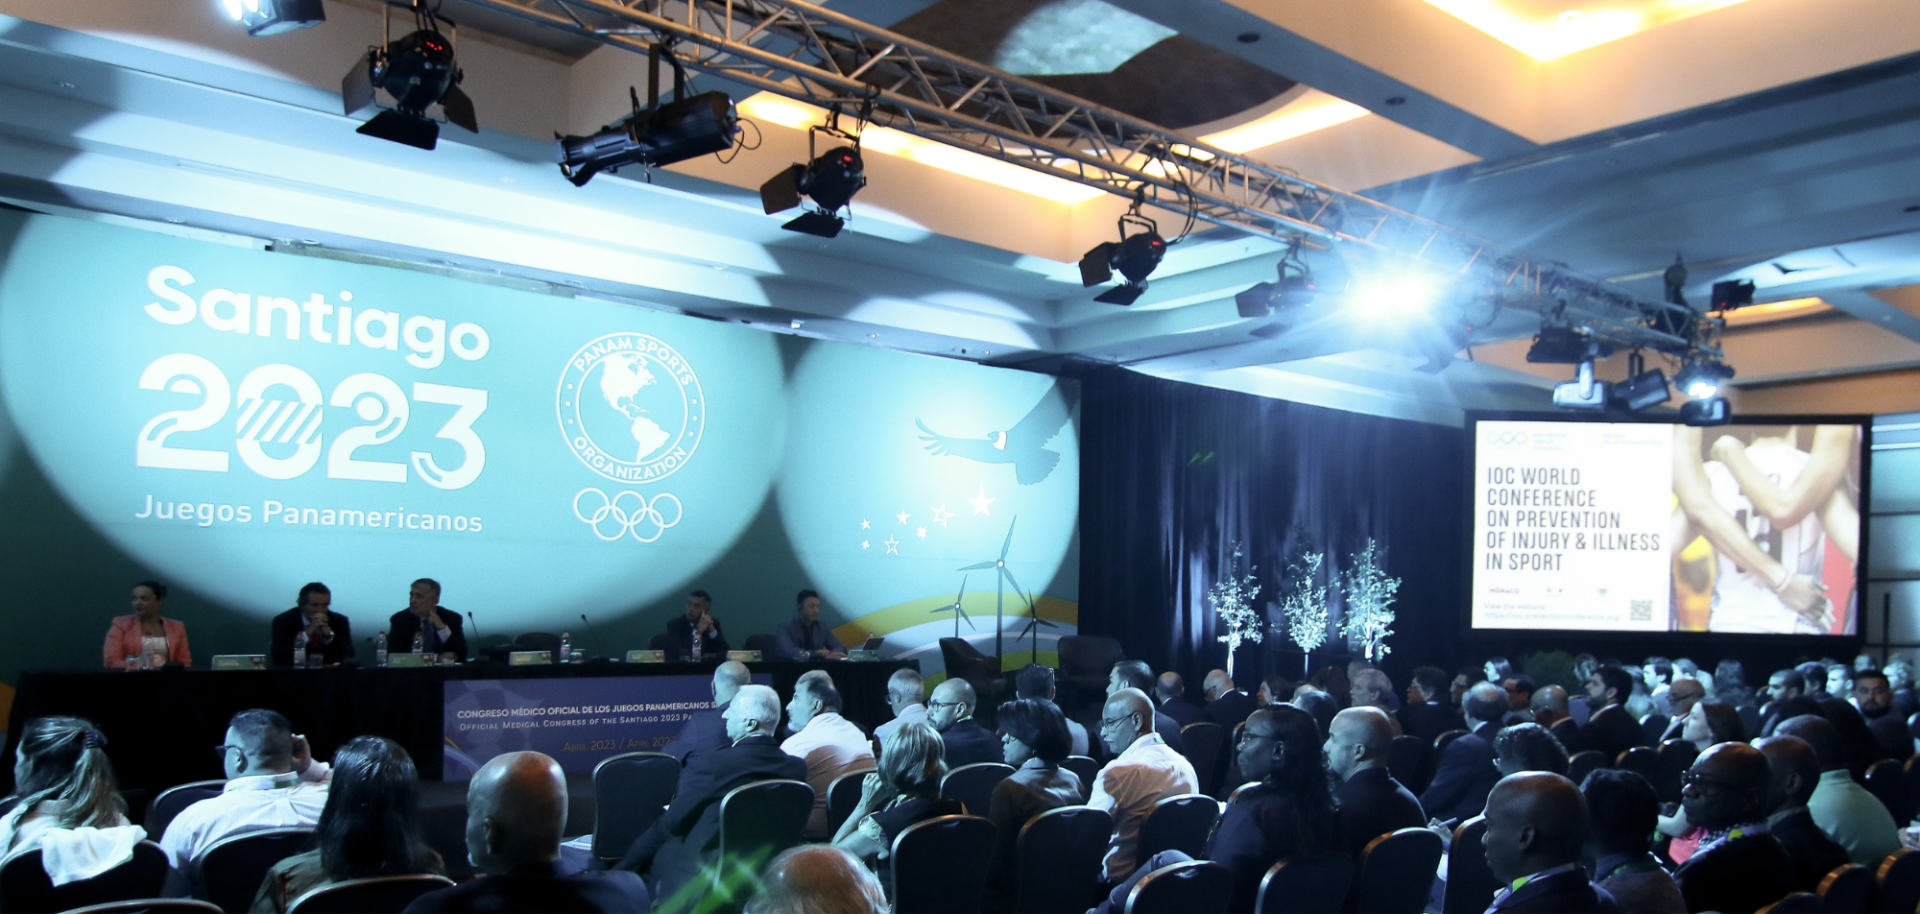 The congress was held in the Hotel Sheraton in Santiago. (Picture from: Santiago 2023).